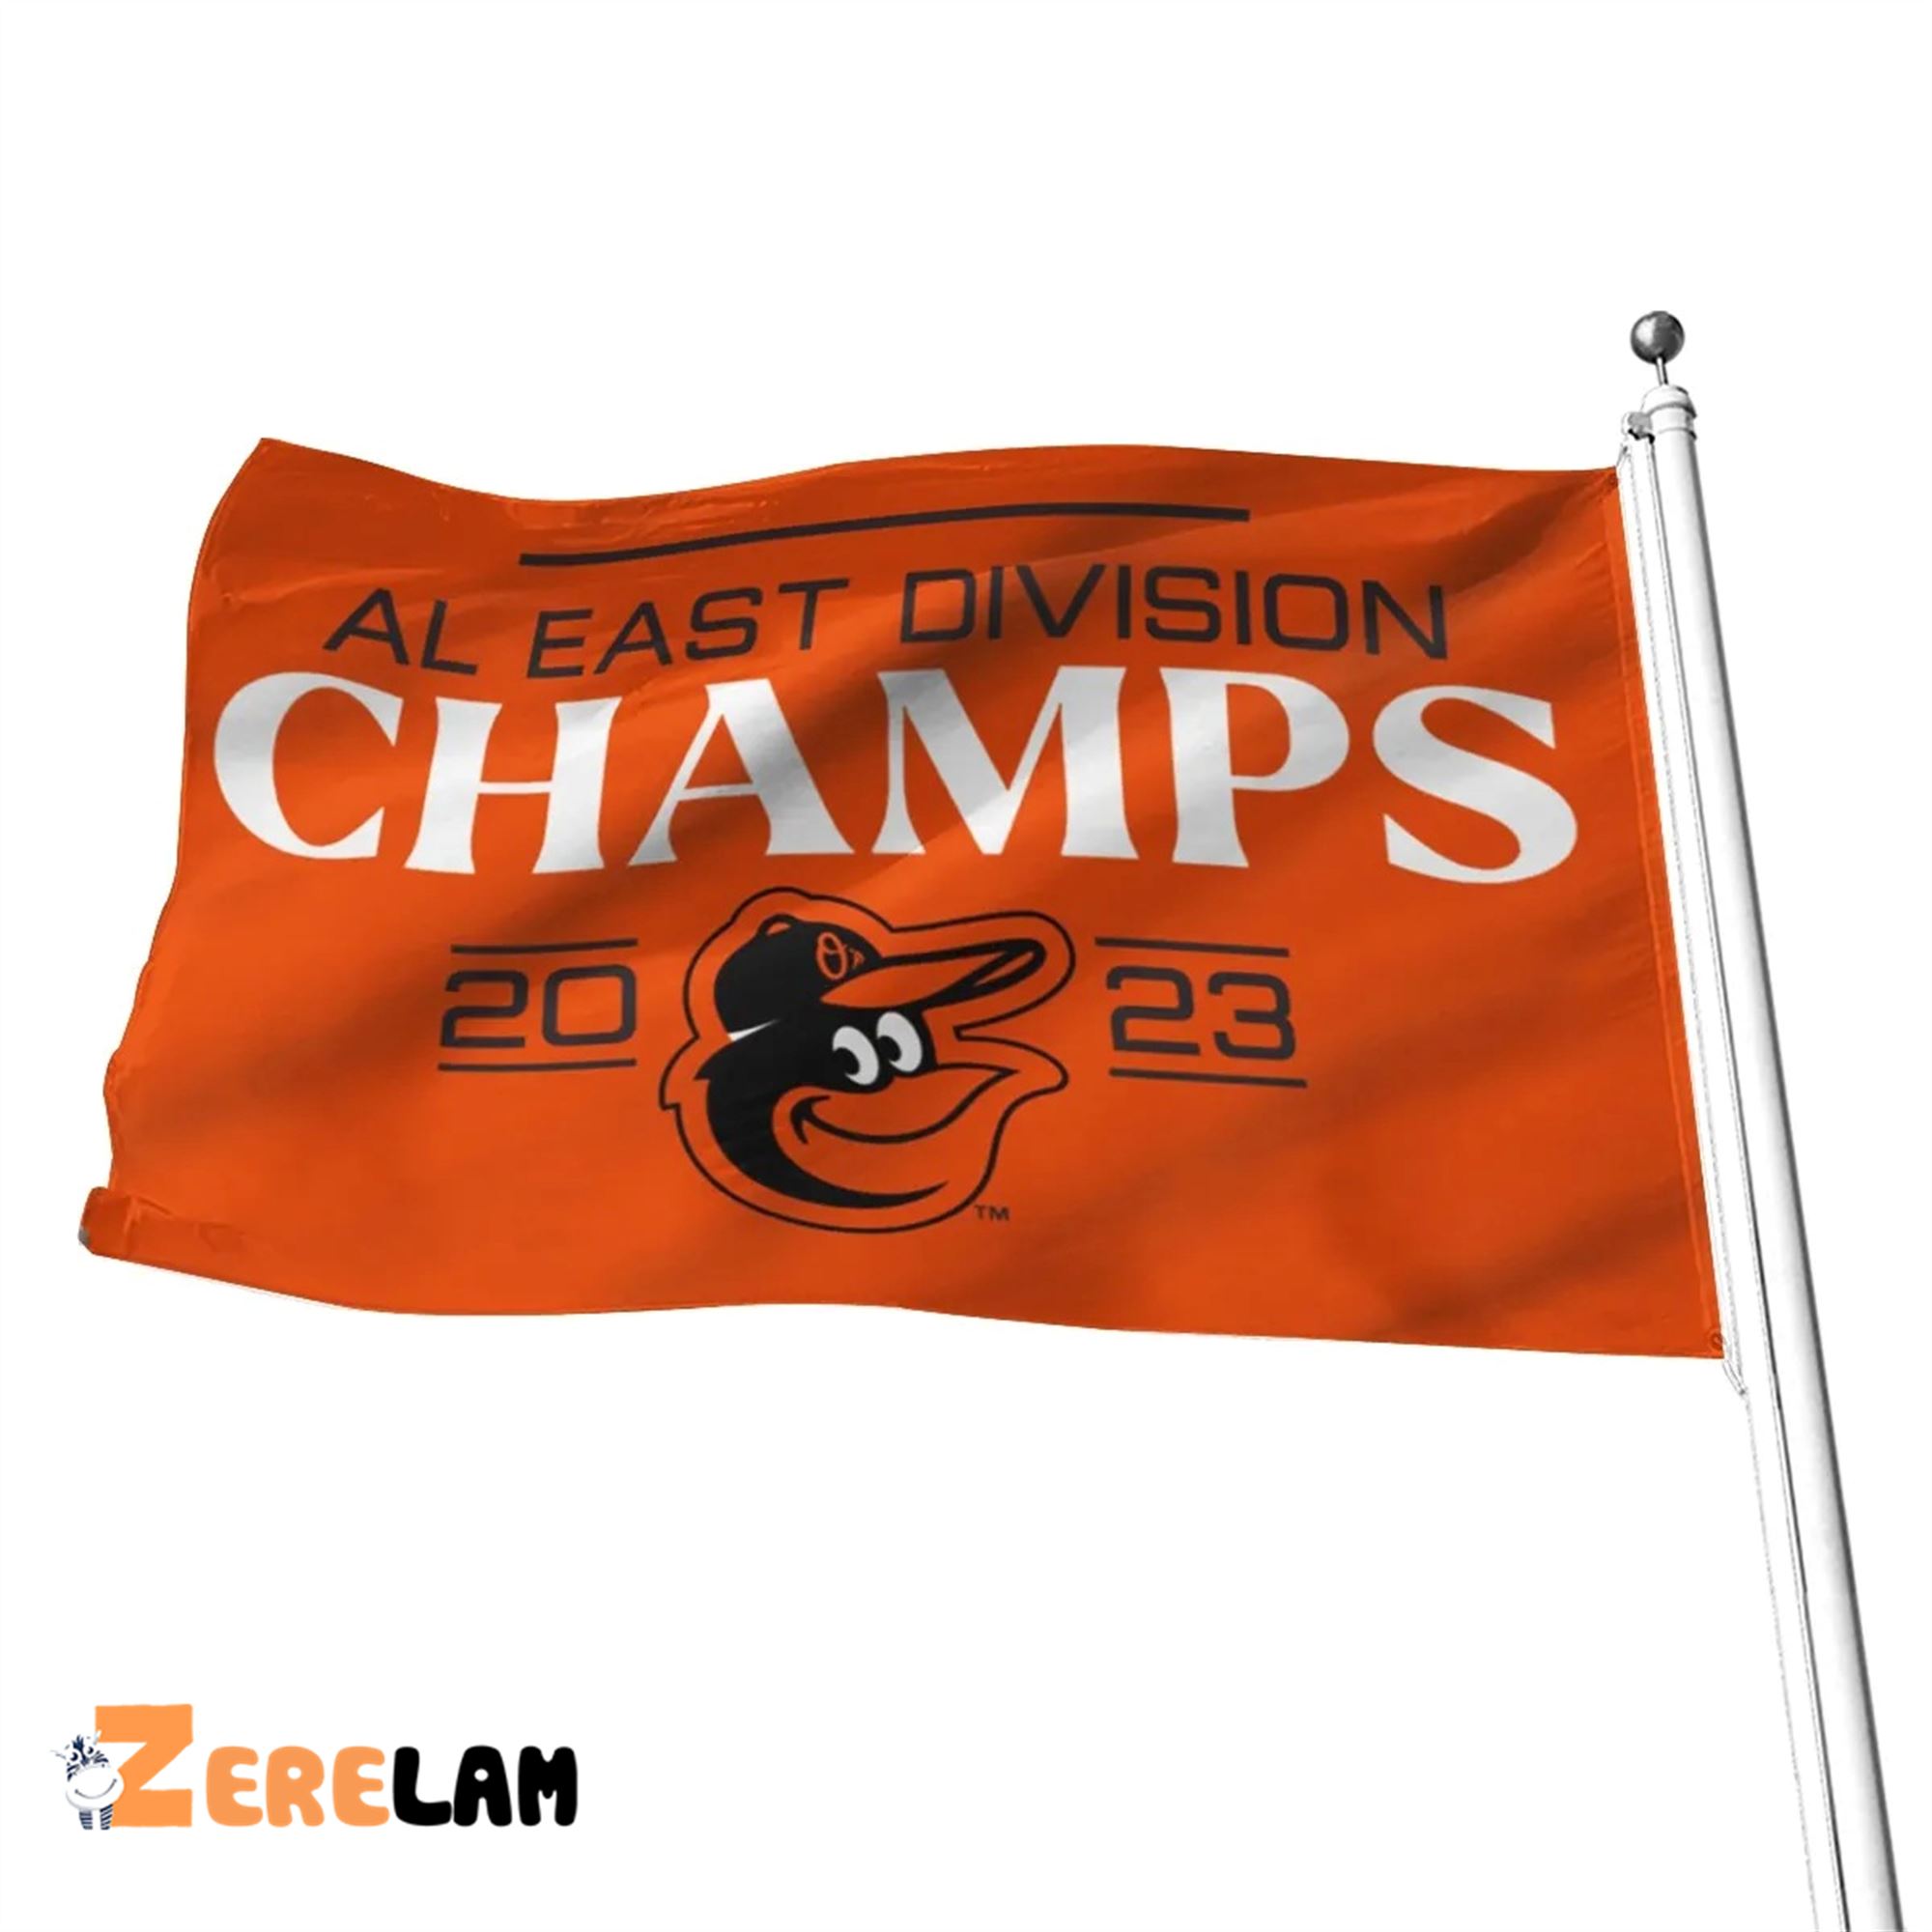 The Baltimore Orioles are American League East champions for the